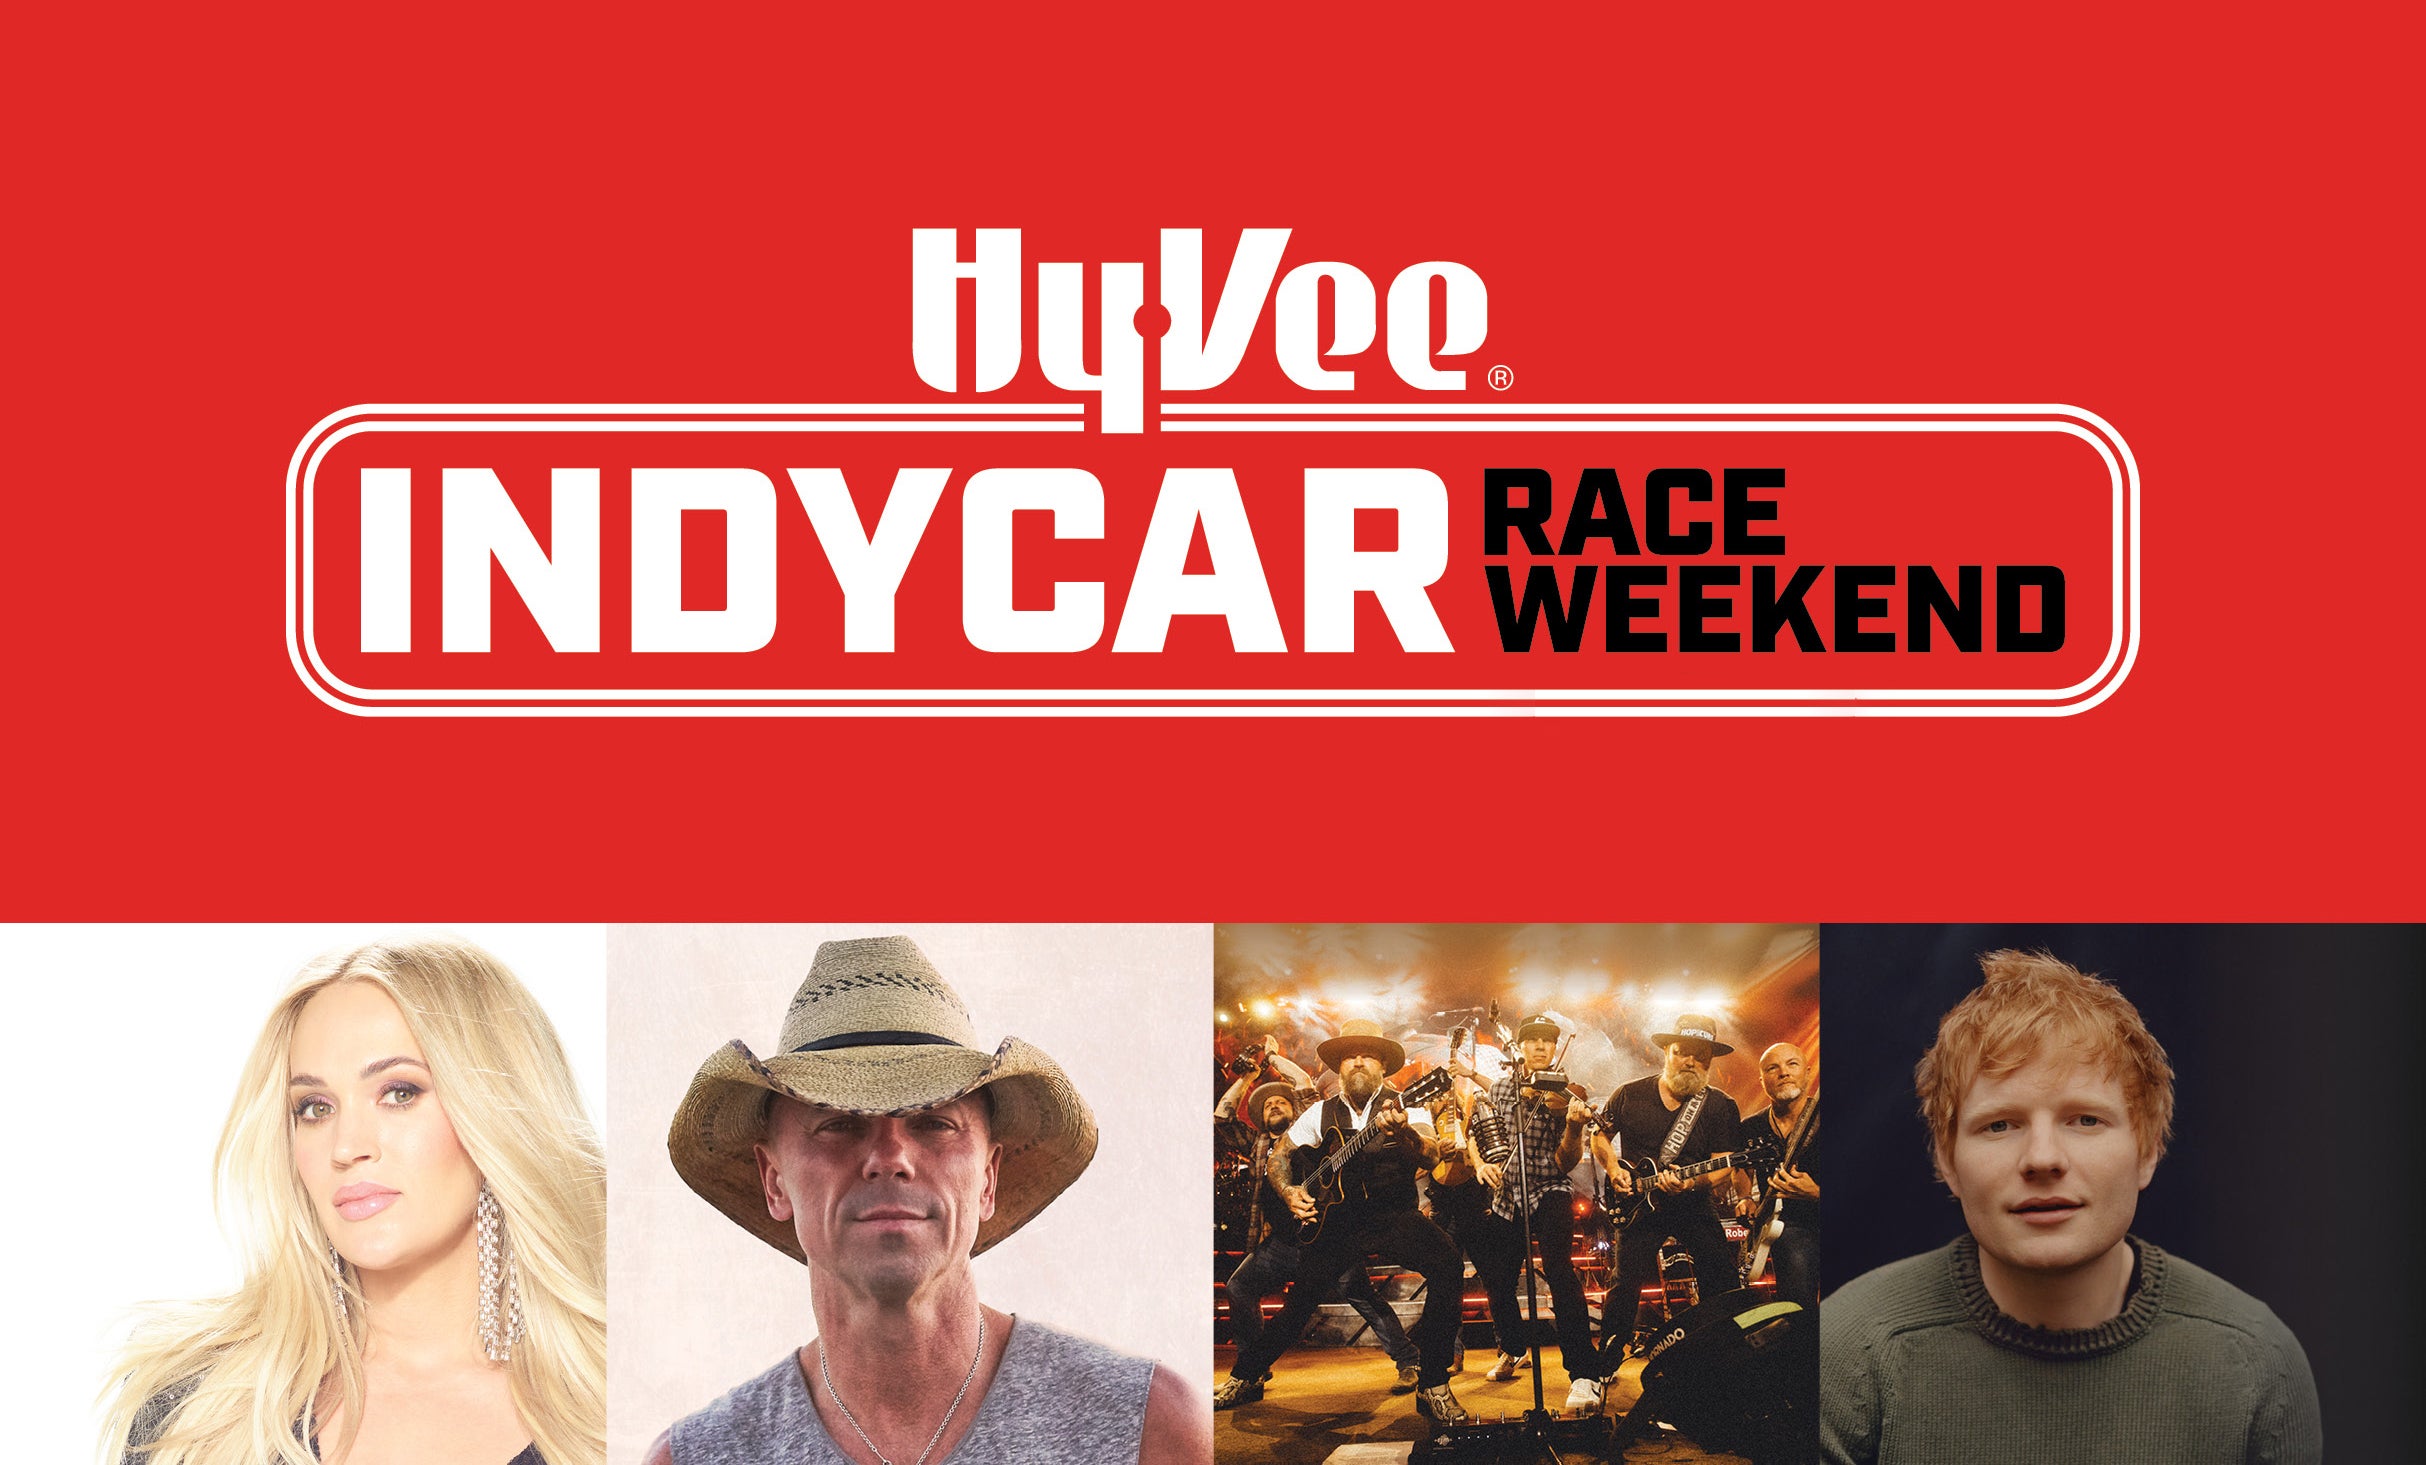 Image used with permission from Ticketmaster | 2023 Hy-Vee INDYCAR Weekend Sunday Concert VIP Upsell tickets